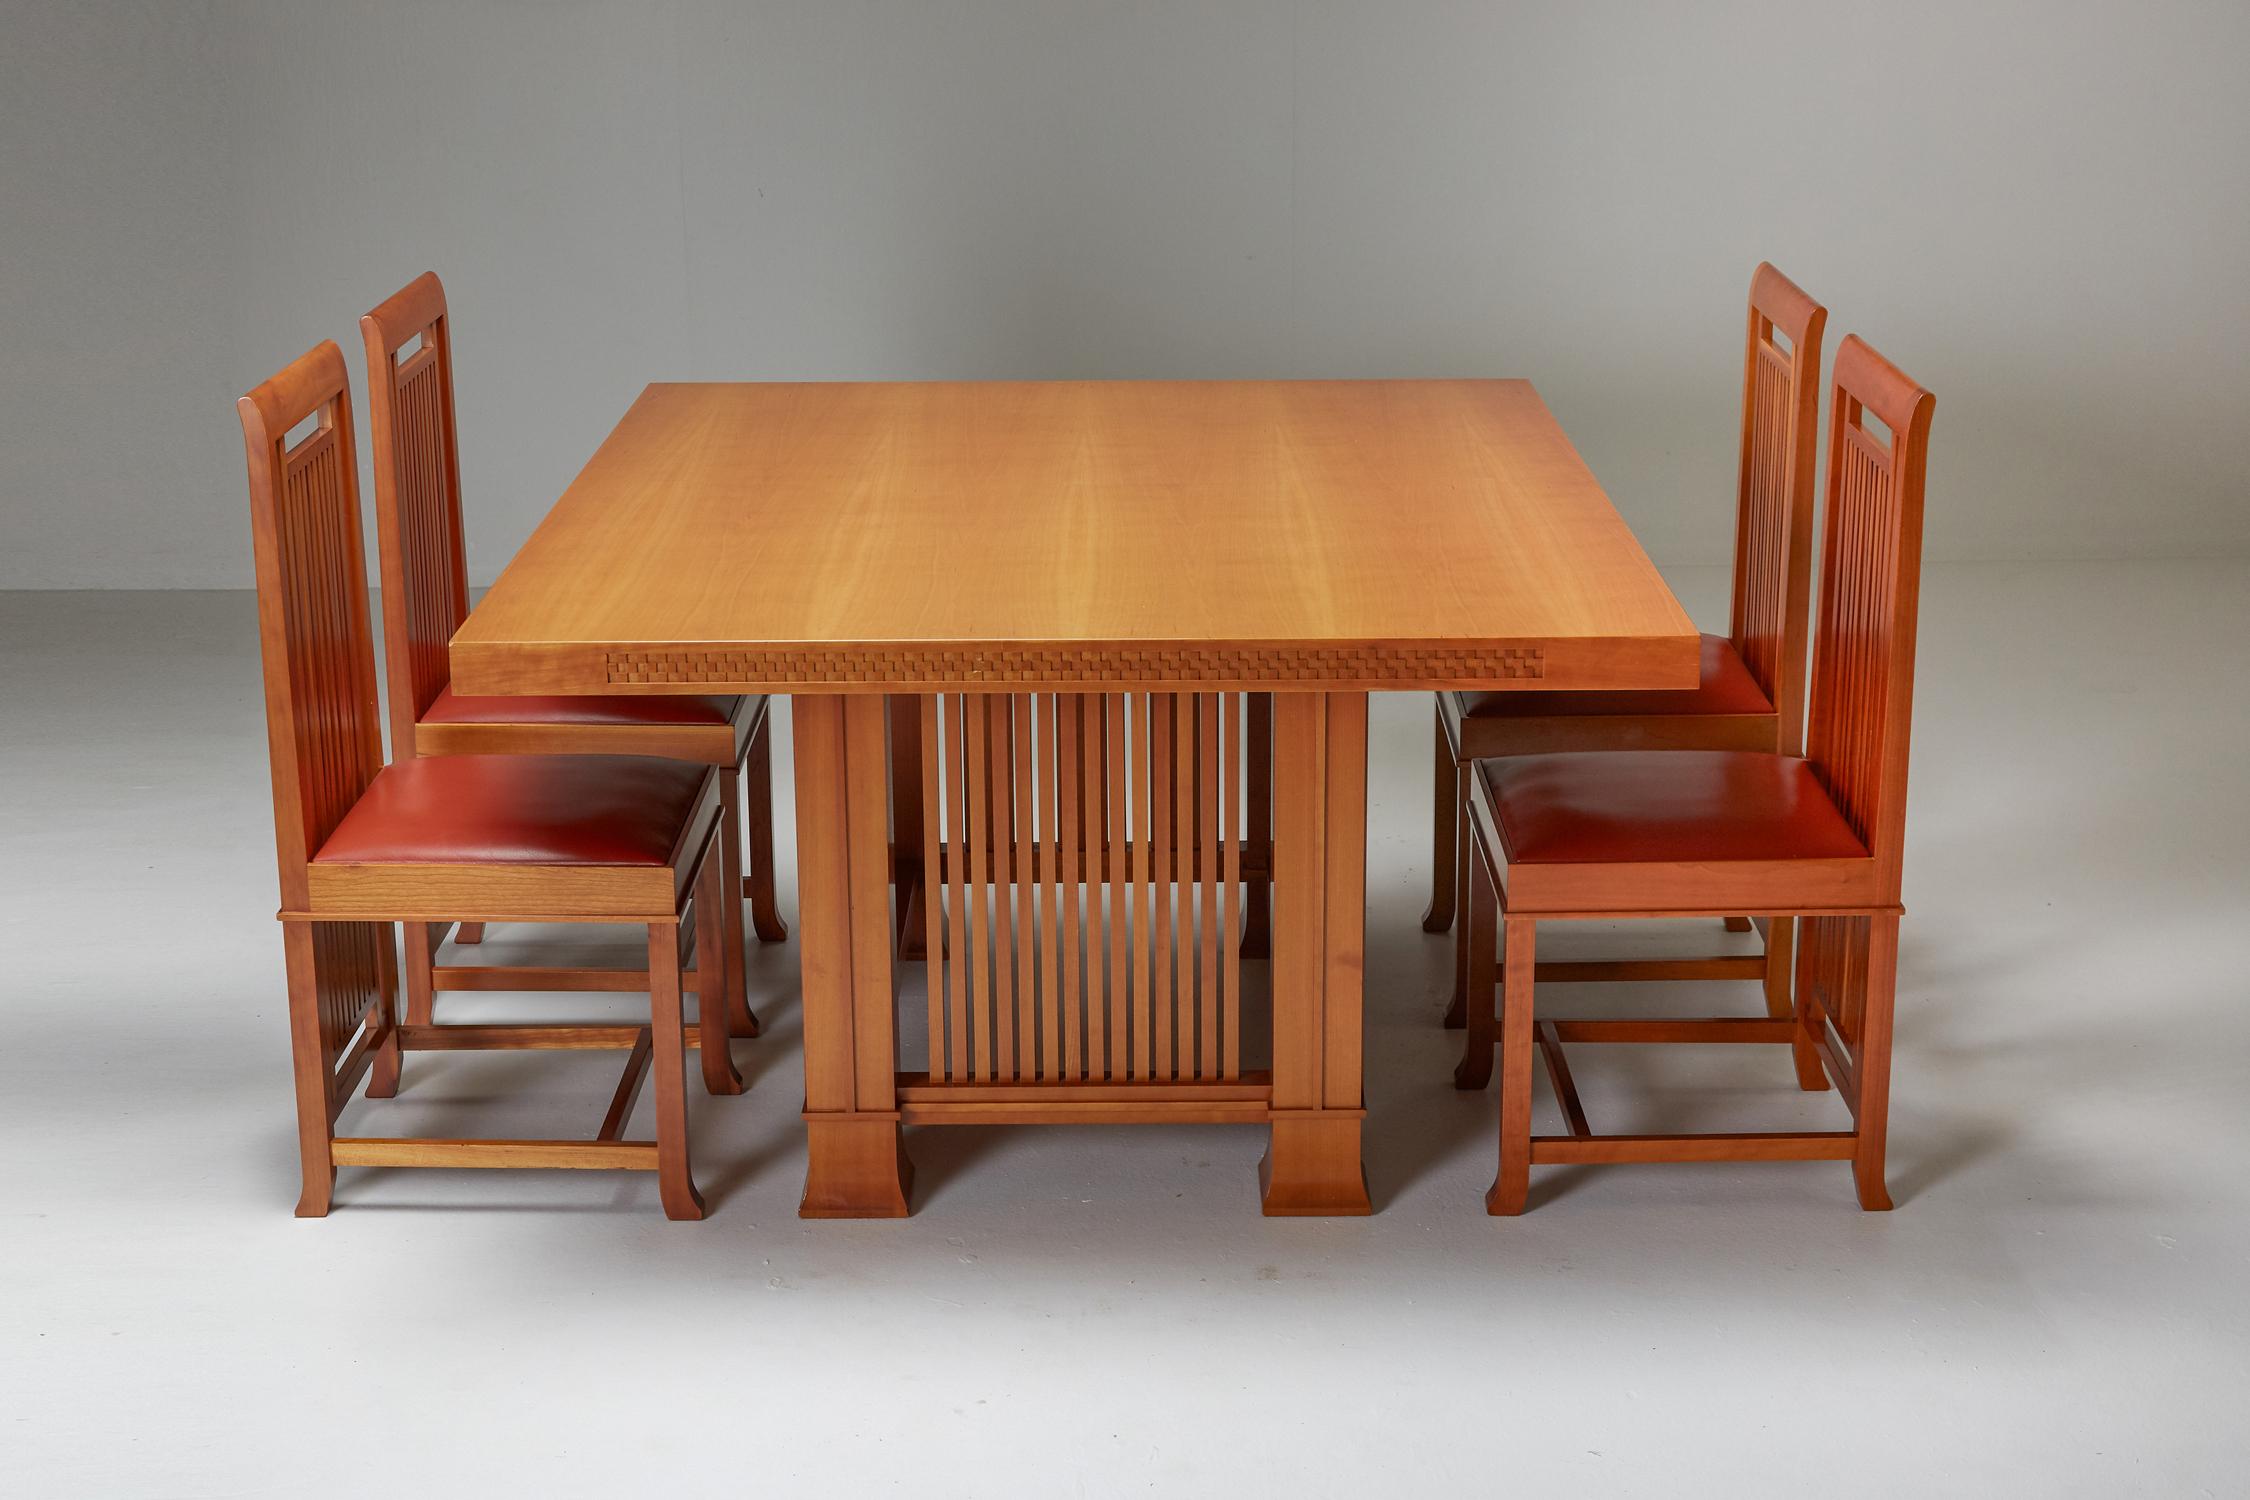 Frank Lloyd Wright, 615 Husser table, 1899 , Cassina, Italy 1992
Frank Lloyd Wright, Coonley chairs, 1907, Cassina, Italy 1992

Designed for the Joseph W. Husser House (Chicago, Illinois), this table was re-edited by Cassina in 1992 and included